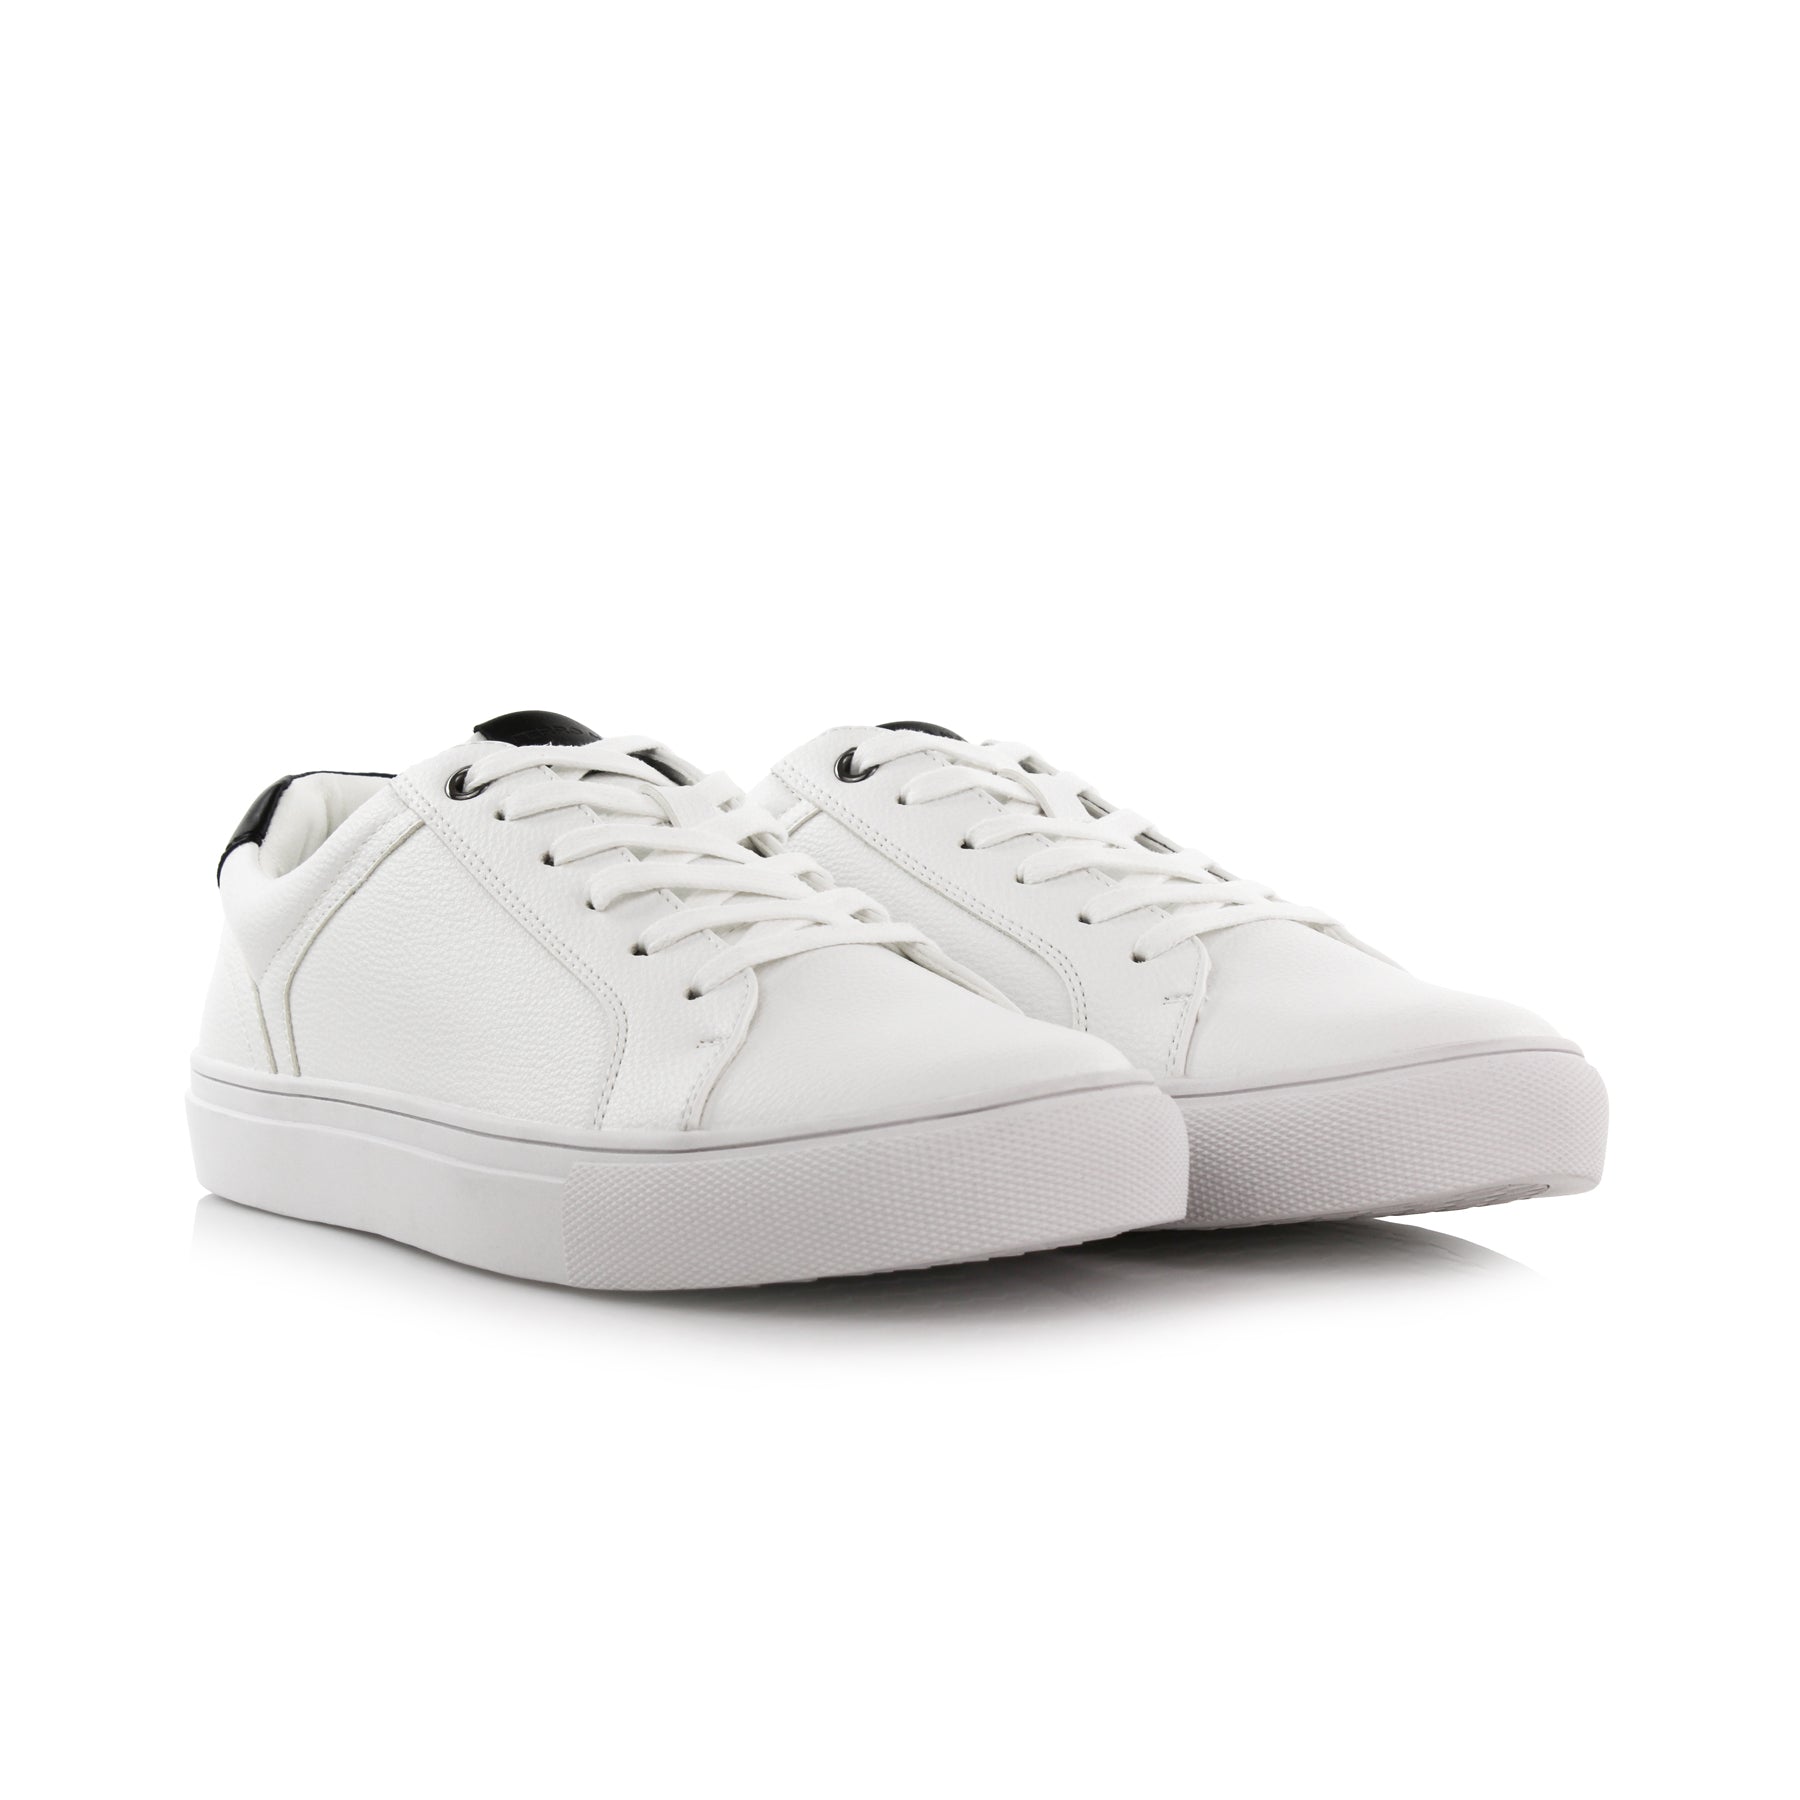 Low-Top Sneakers | Daniel by Ferro Aldo | Conal Footwear | Paired Angle View